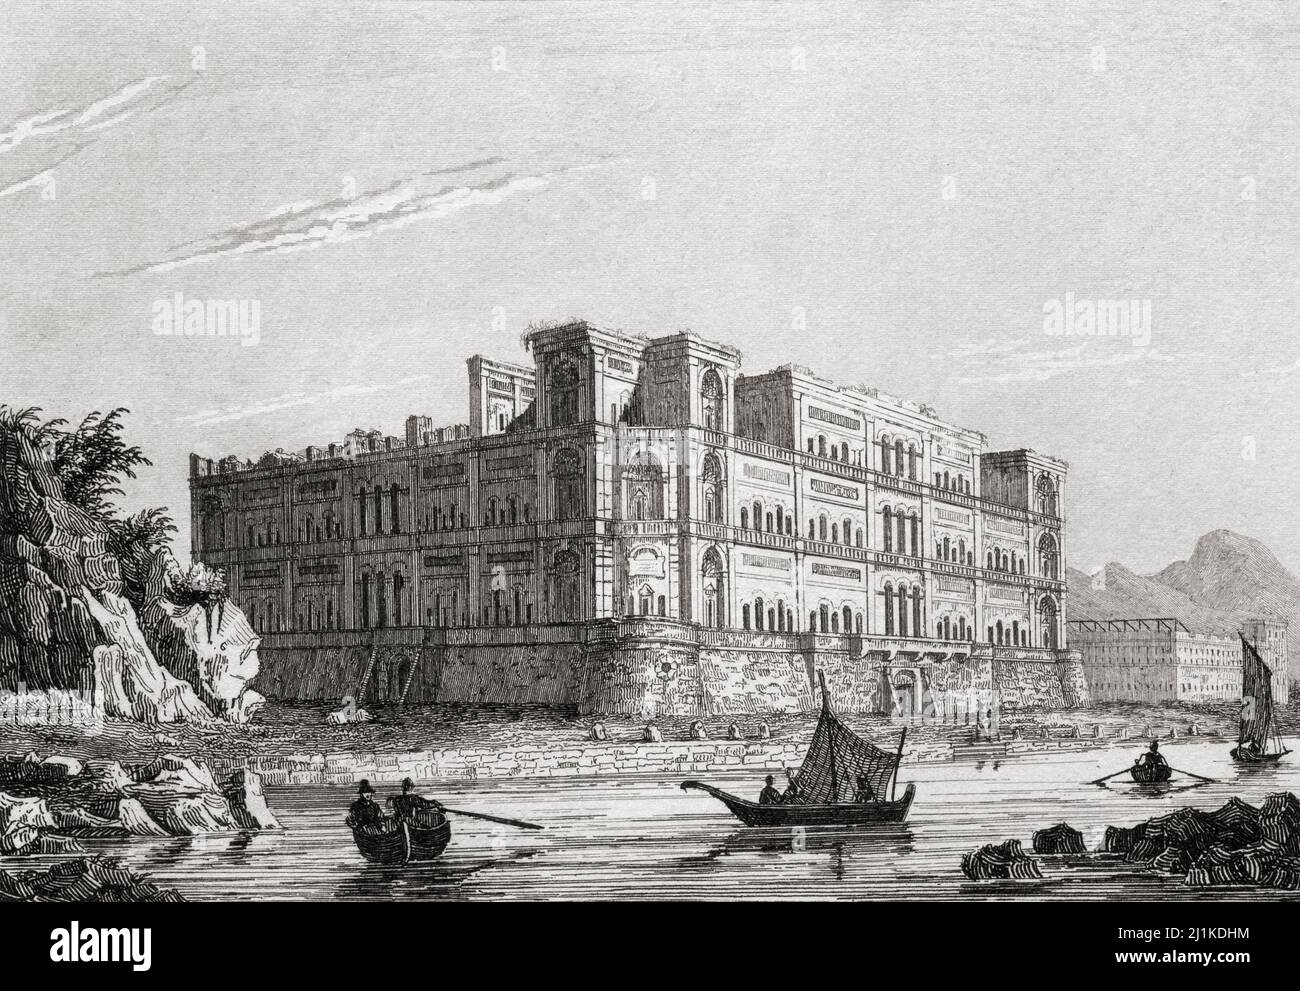 Villa Donn'Anna, Naples, Italy. 19th century steel engraving by Lemaitre direxit. Stock Photo